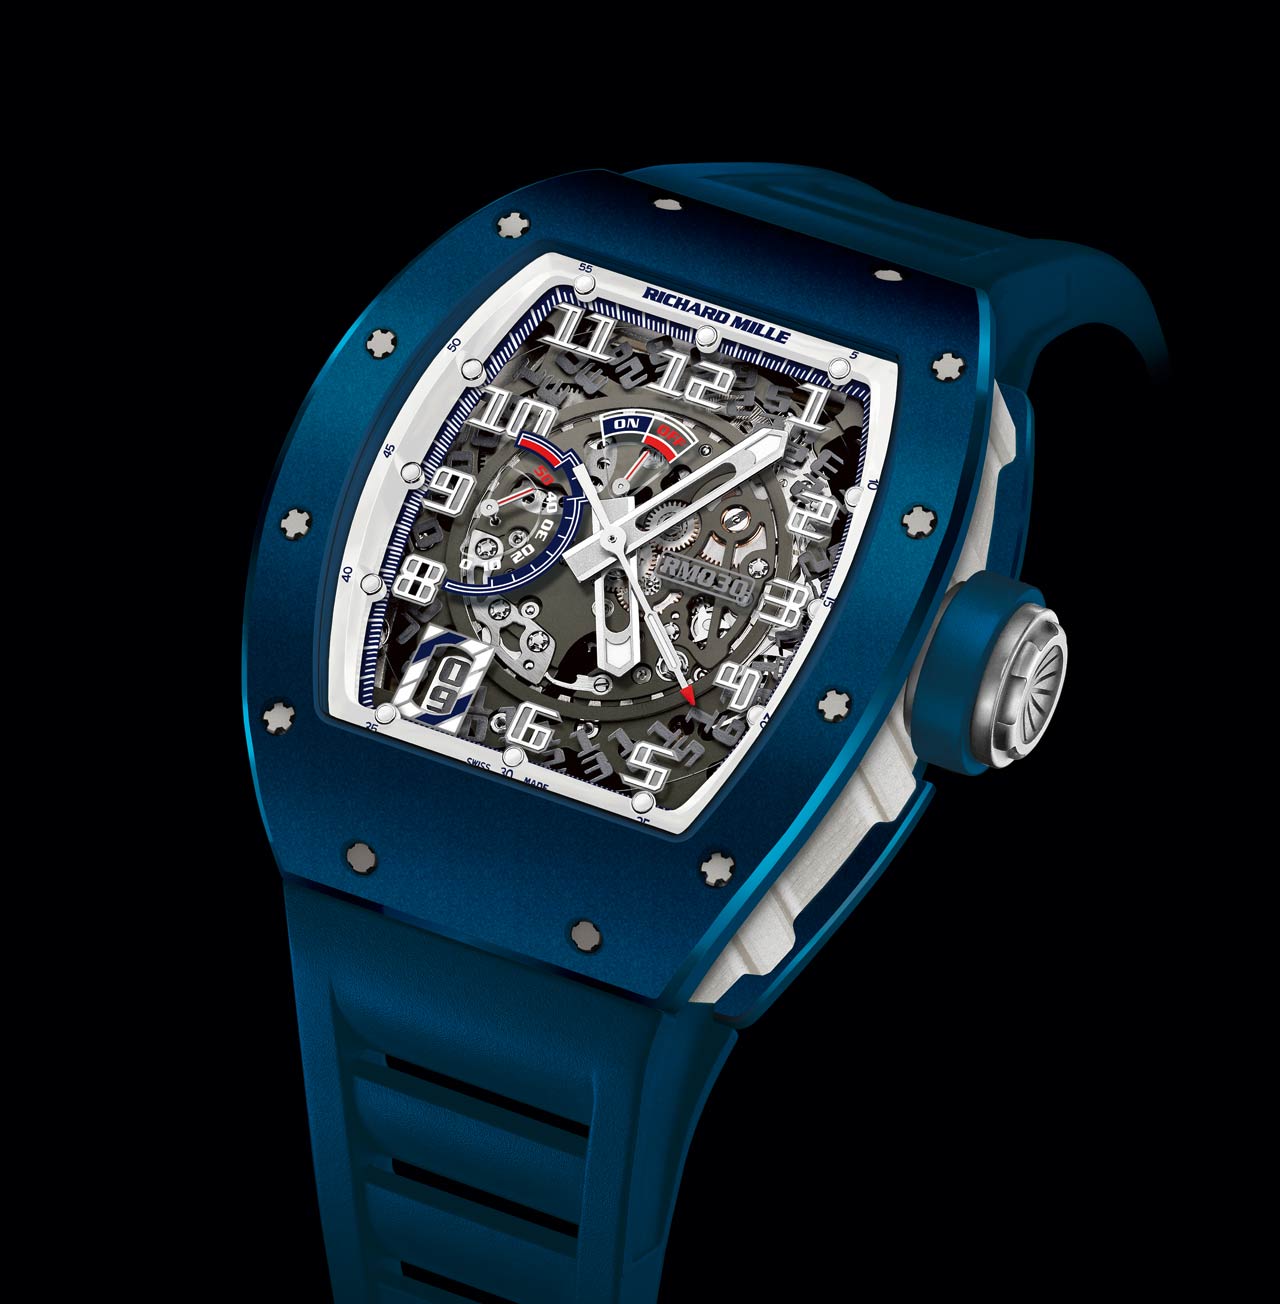 Richard Mille - RM 030 Blue Ceramic EMEA Limited Edition | Time and Watches